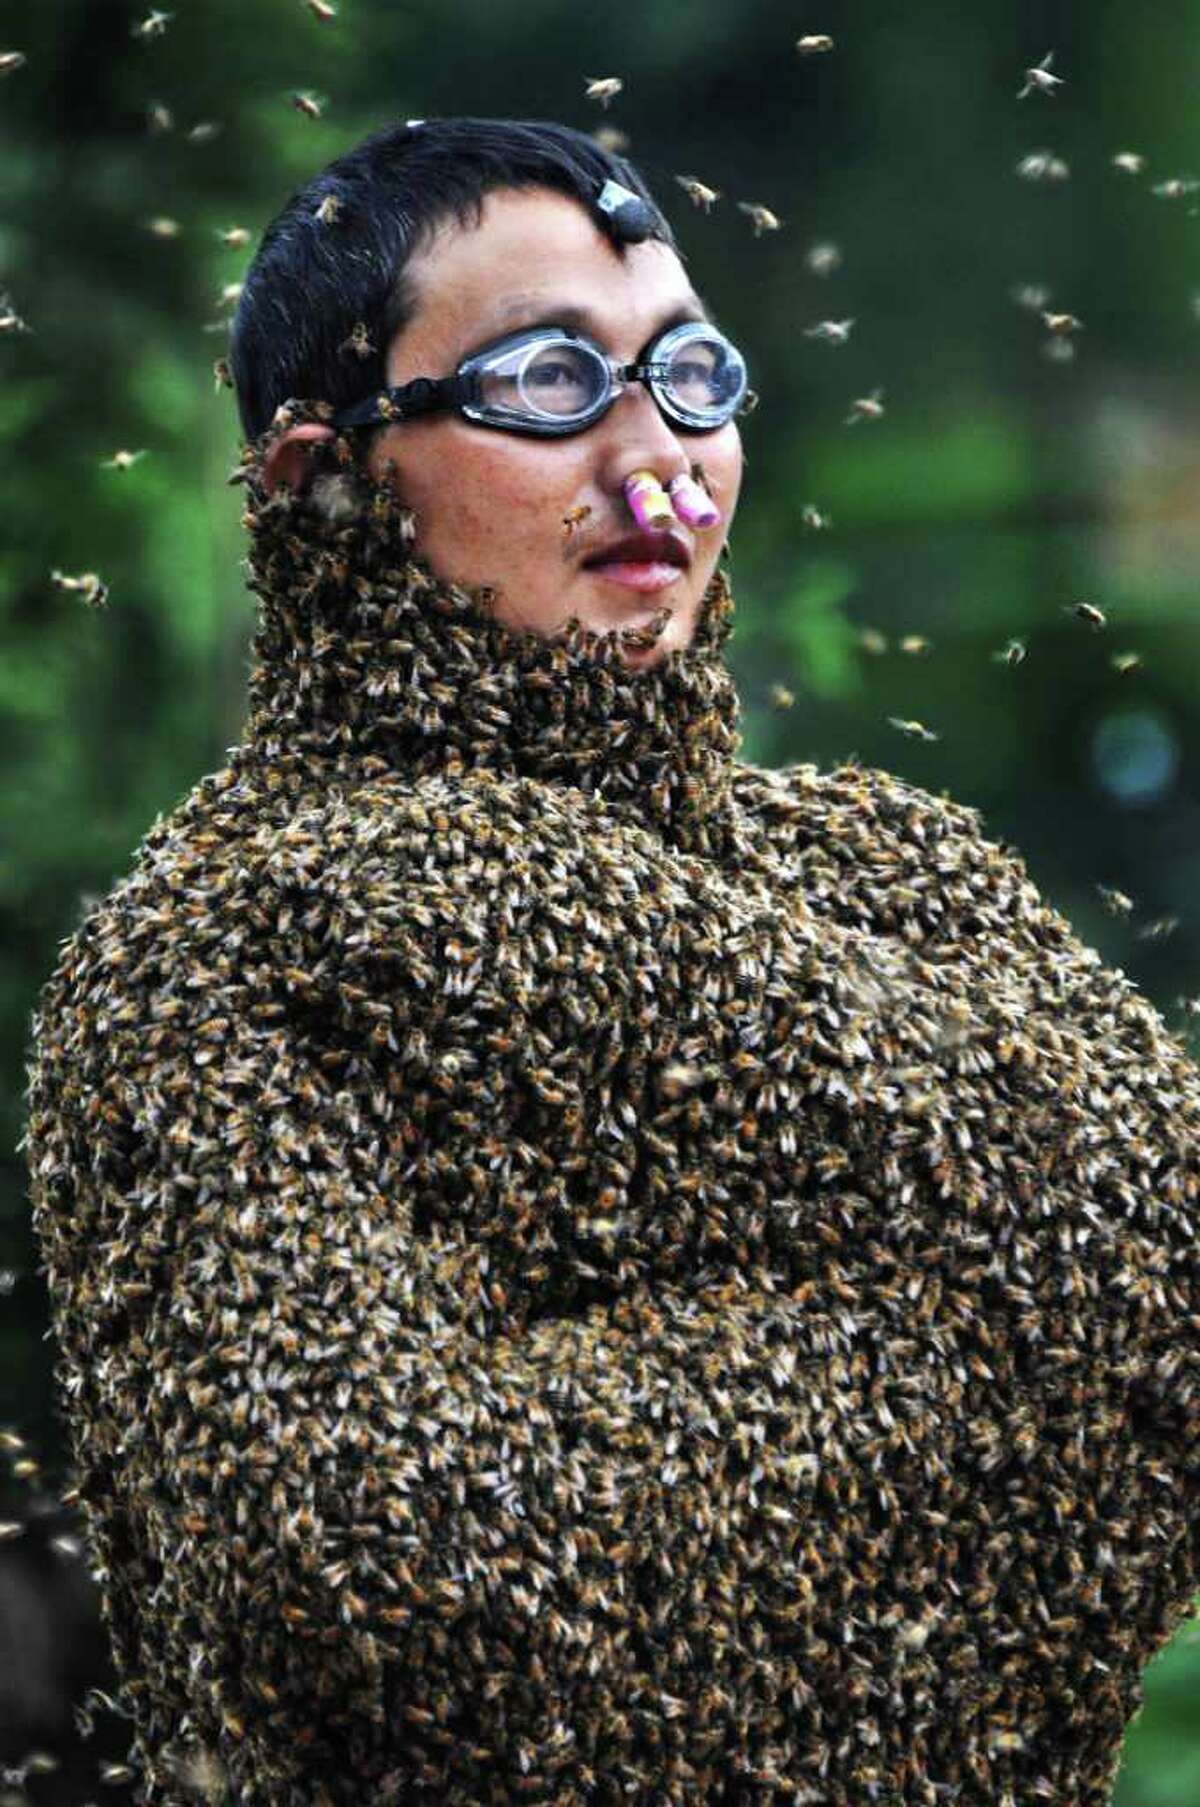 In this photo released by Xinhua News Agency, 42-year-old beekeeper Wang Dalin is covered with bees during a contest against 20-year-old Lu Kongjiang, also a beekeeper, in Longhui County of Shaoyang City, central China's Hunan Province, Sunday, July 17, 2011. Wang finally won in the hour-long duel since 26 kilograms (57 pounds) of bees covered his body, Xinhua said. (AP Photo/Xinhua/Lu Jianshe) NO SALES